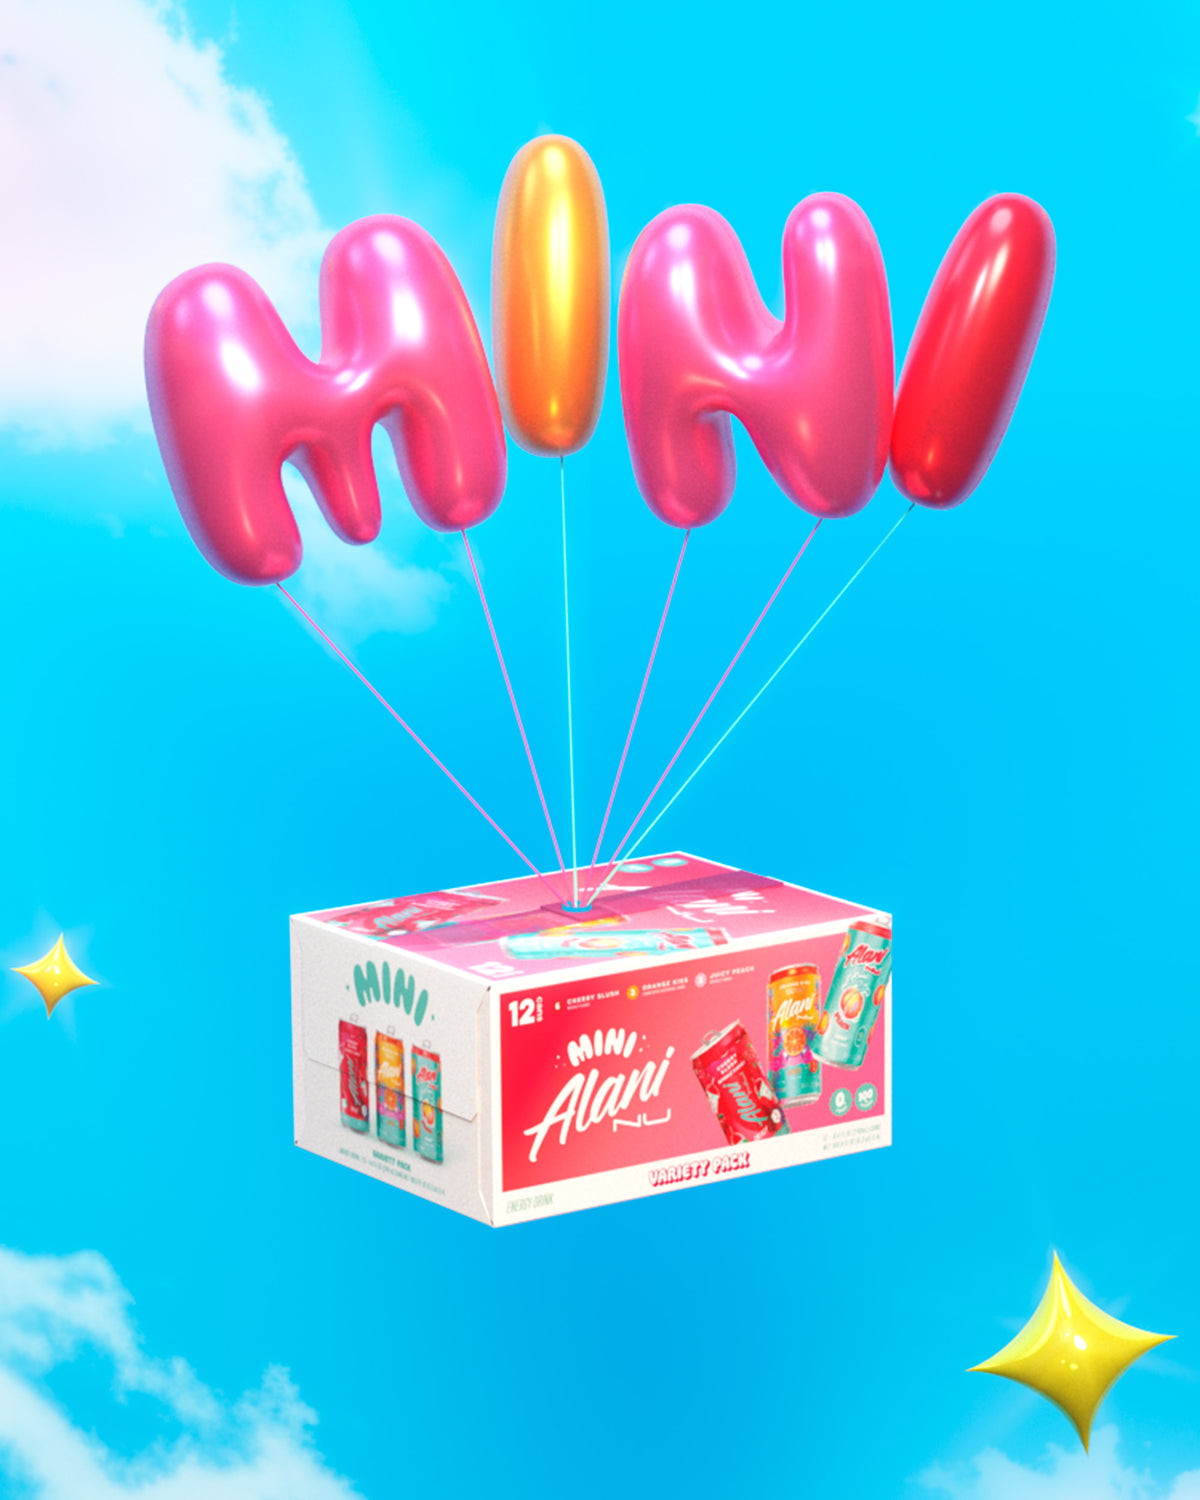 A whimsical and playful image featuring a variety pack of Alani Energy drink mini cans. The box is floating in the sky, supported by colorful balloon letters that spell out &quot;MINI.&quot; The balloons are in shades of pink and gold, adding to the festive atmosphere. 